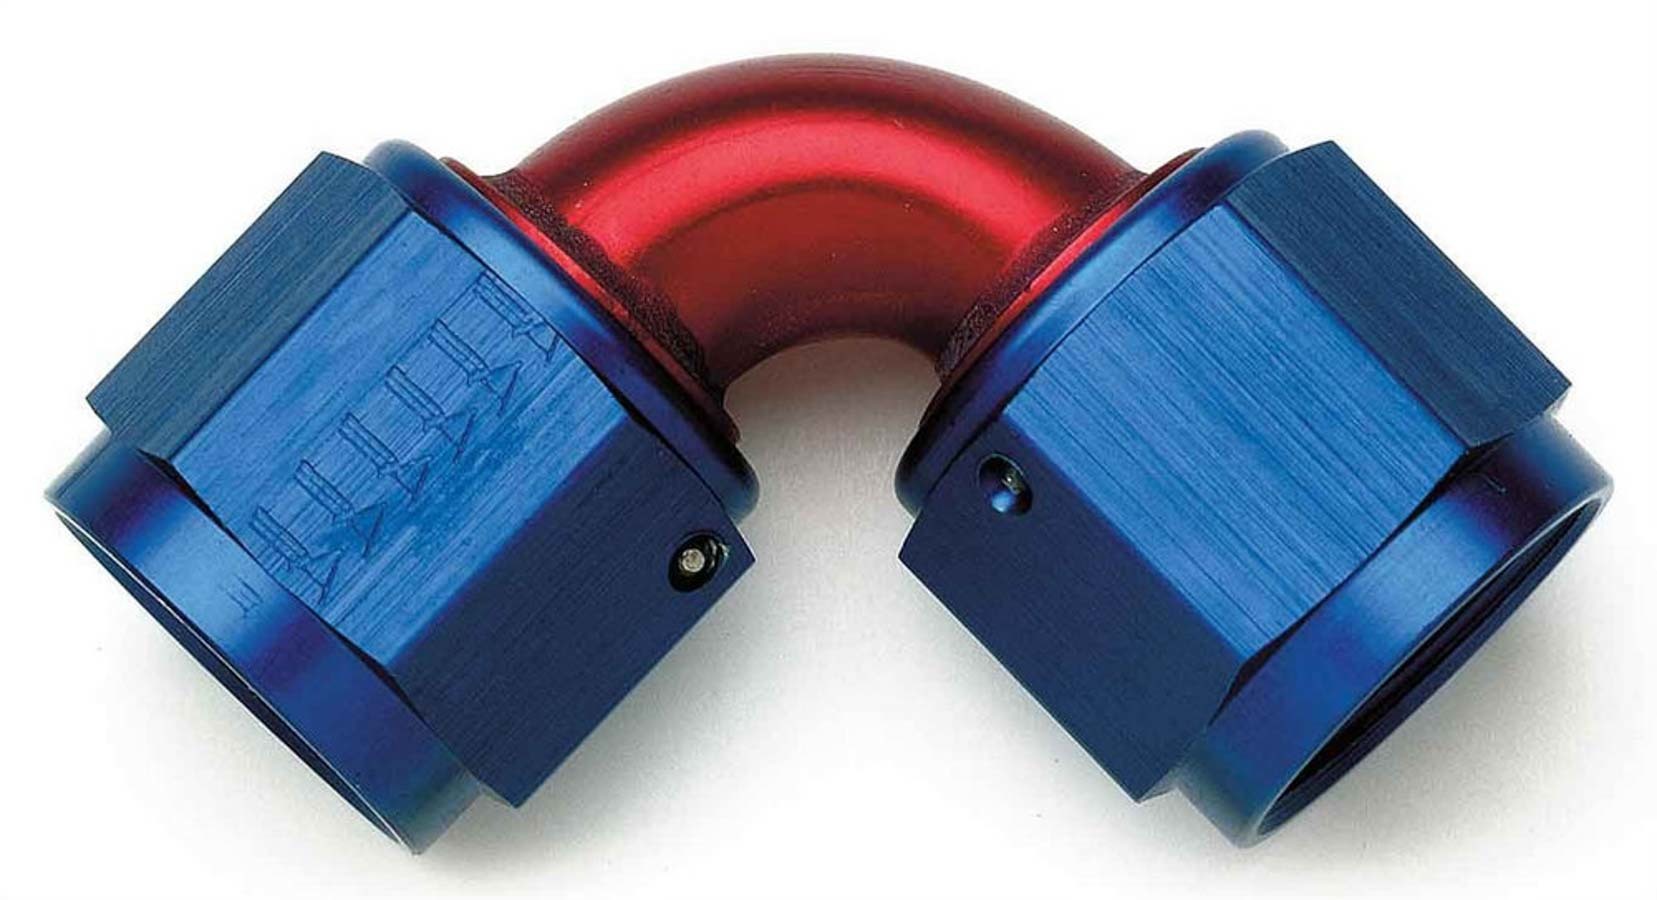 Aeroquip FCM2978 Fitting, Adapter, 90 Degree, 6 AN Female Swivel to 6 AN Female Swivel, Aluminum, Blue / Red Anodized, Each